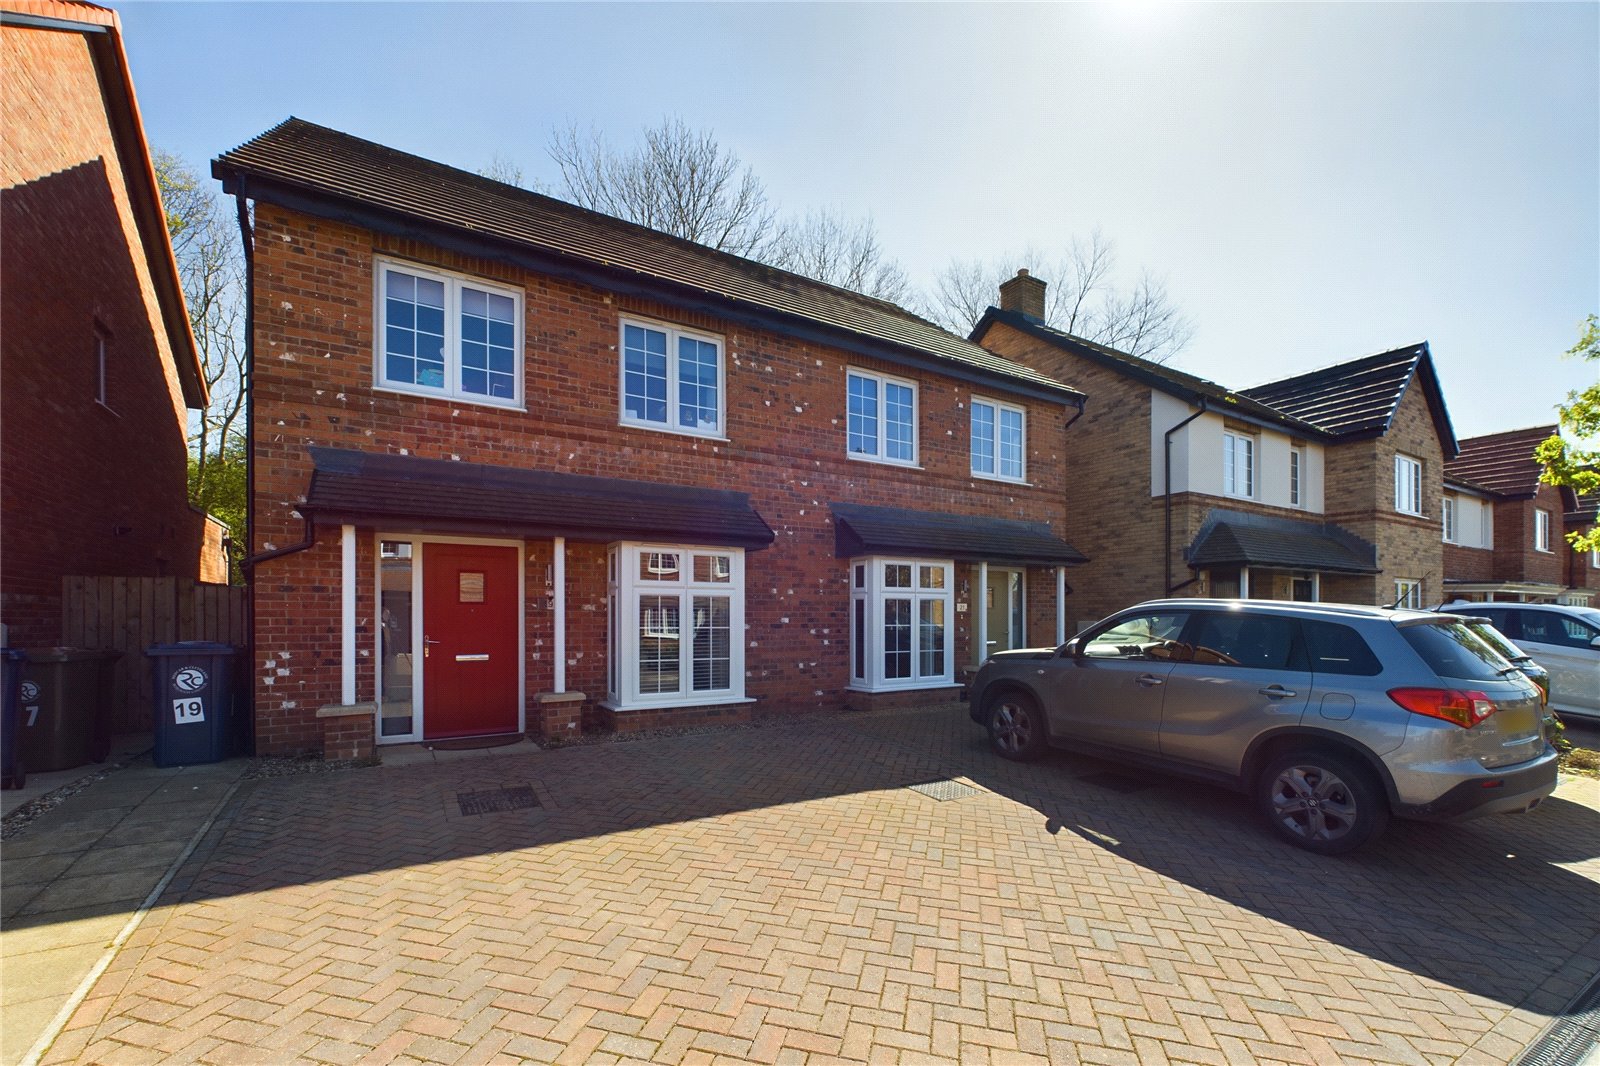 3 bed house for sale in Hunters Hill Close, Guisborough - Property Image 1